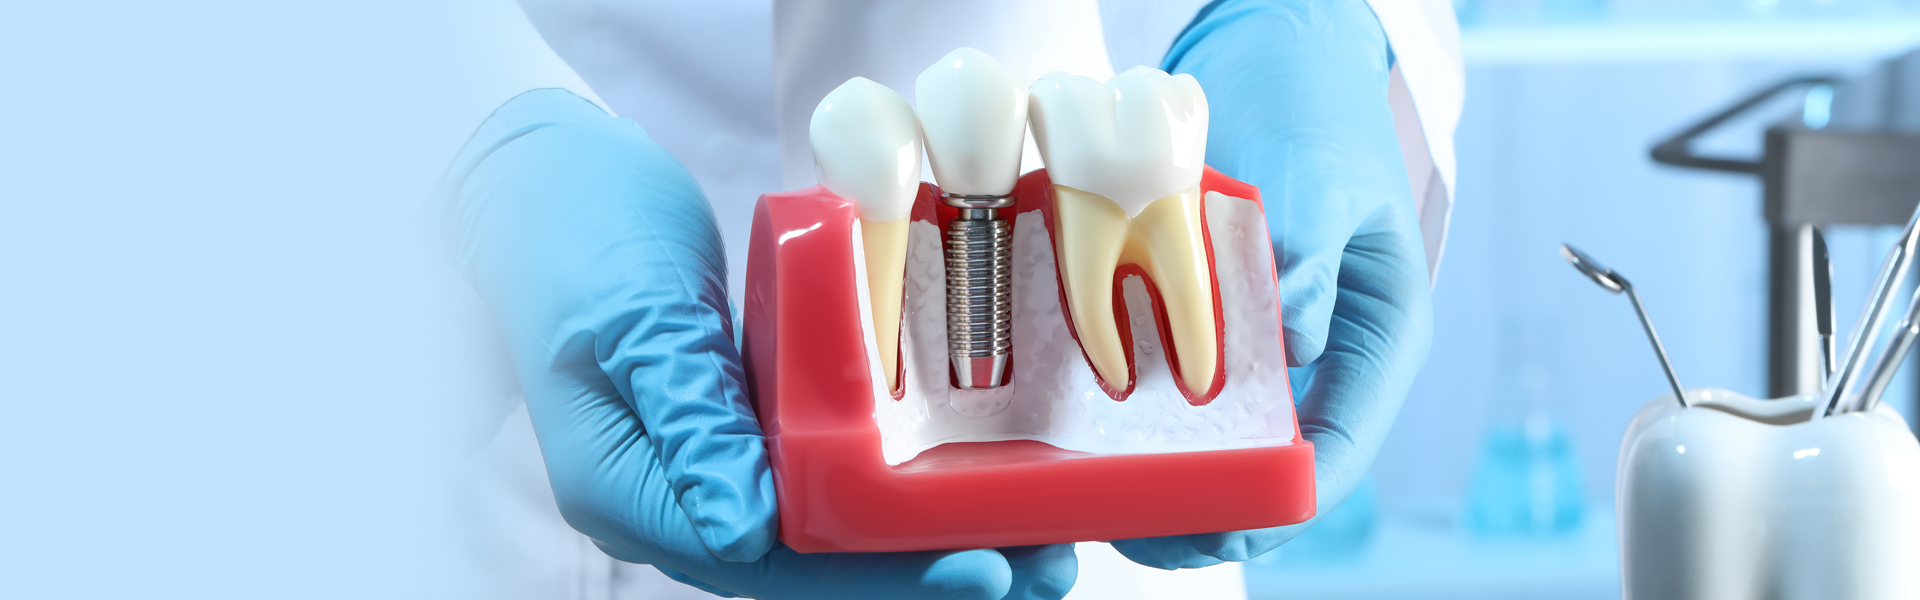 How Long After Pulling A Tooth Can You Get An Implant?